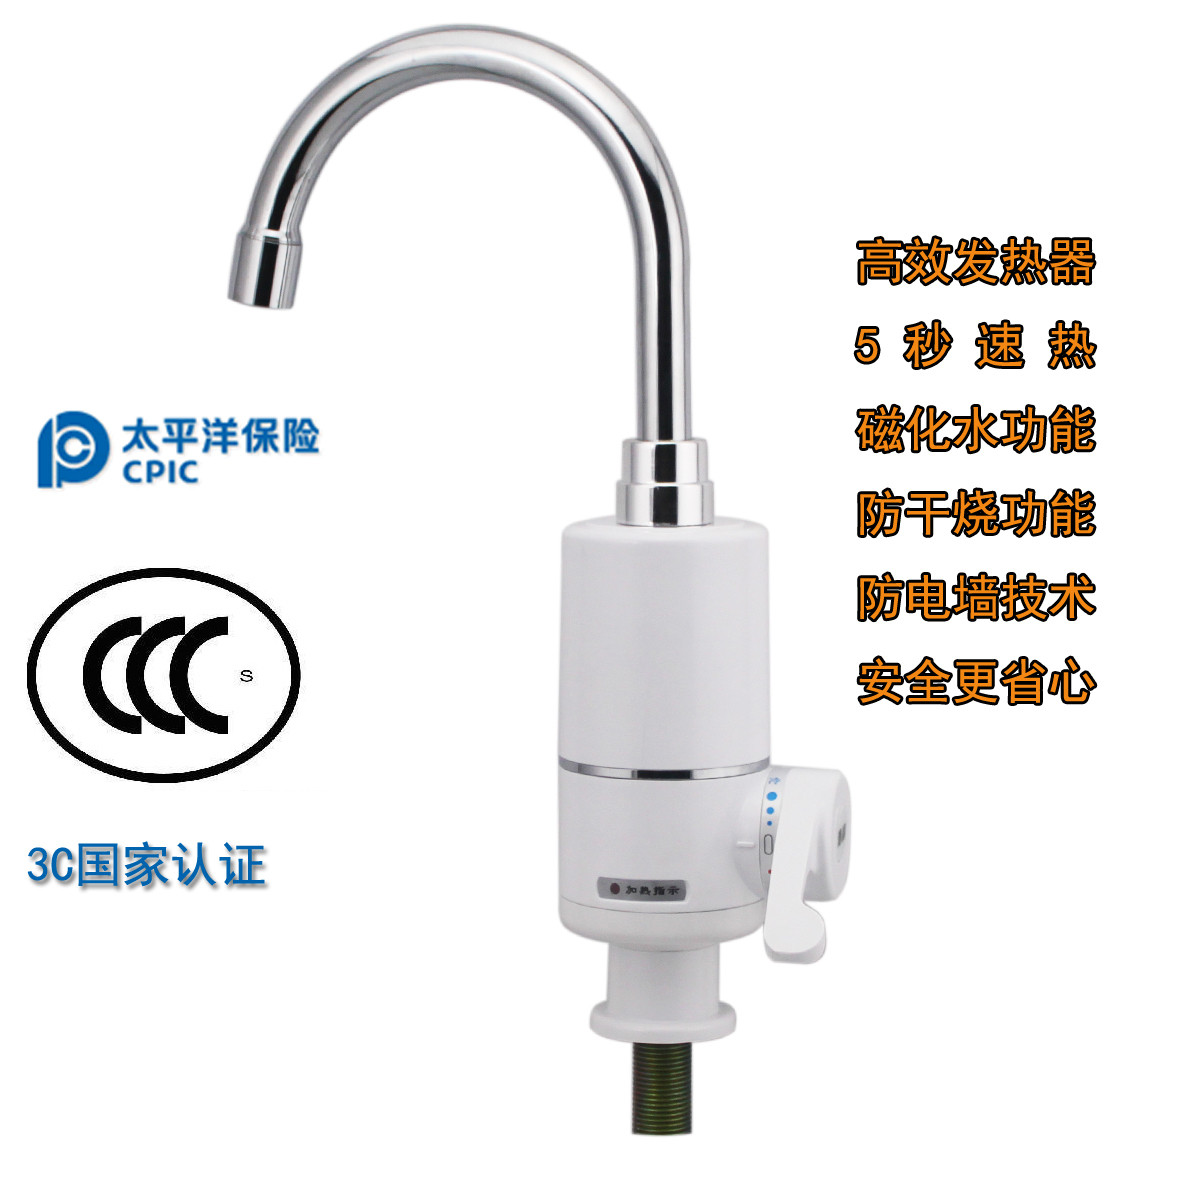 Cheap Free shipping 3000W 200V HL-302D Electric Water Heater Faucet Display Fast Heating Instant Hot Faucet Water Taps for sale